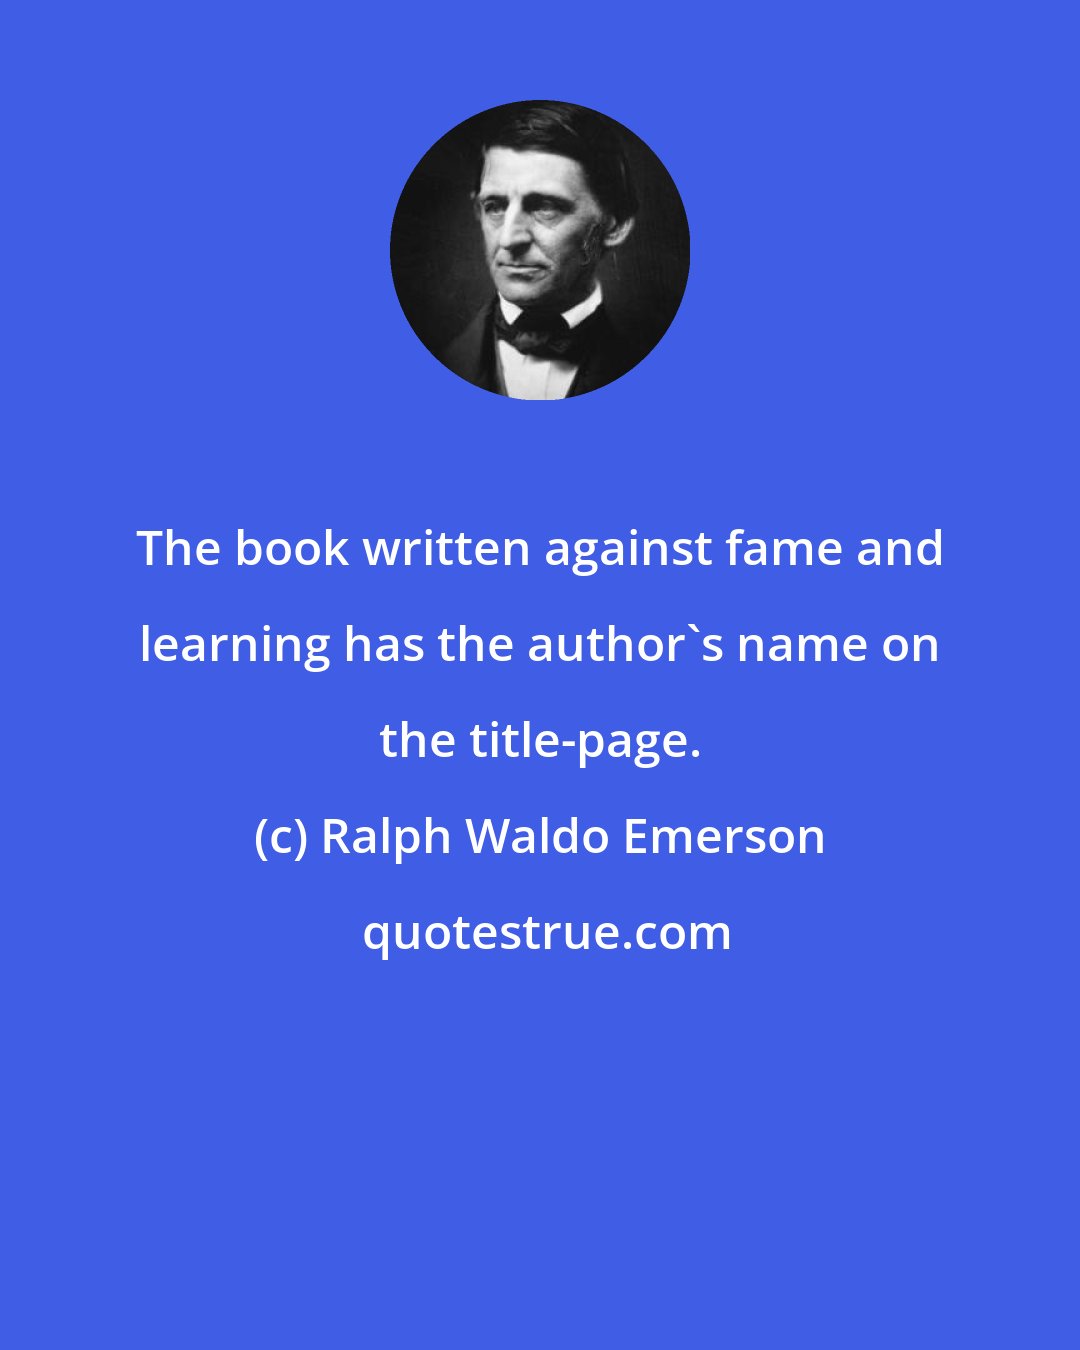 Ralph Waldo Emerson: The book written against fame and learning has the author's name on the title-page.